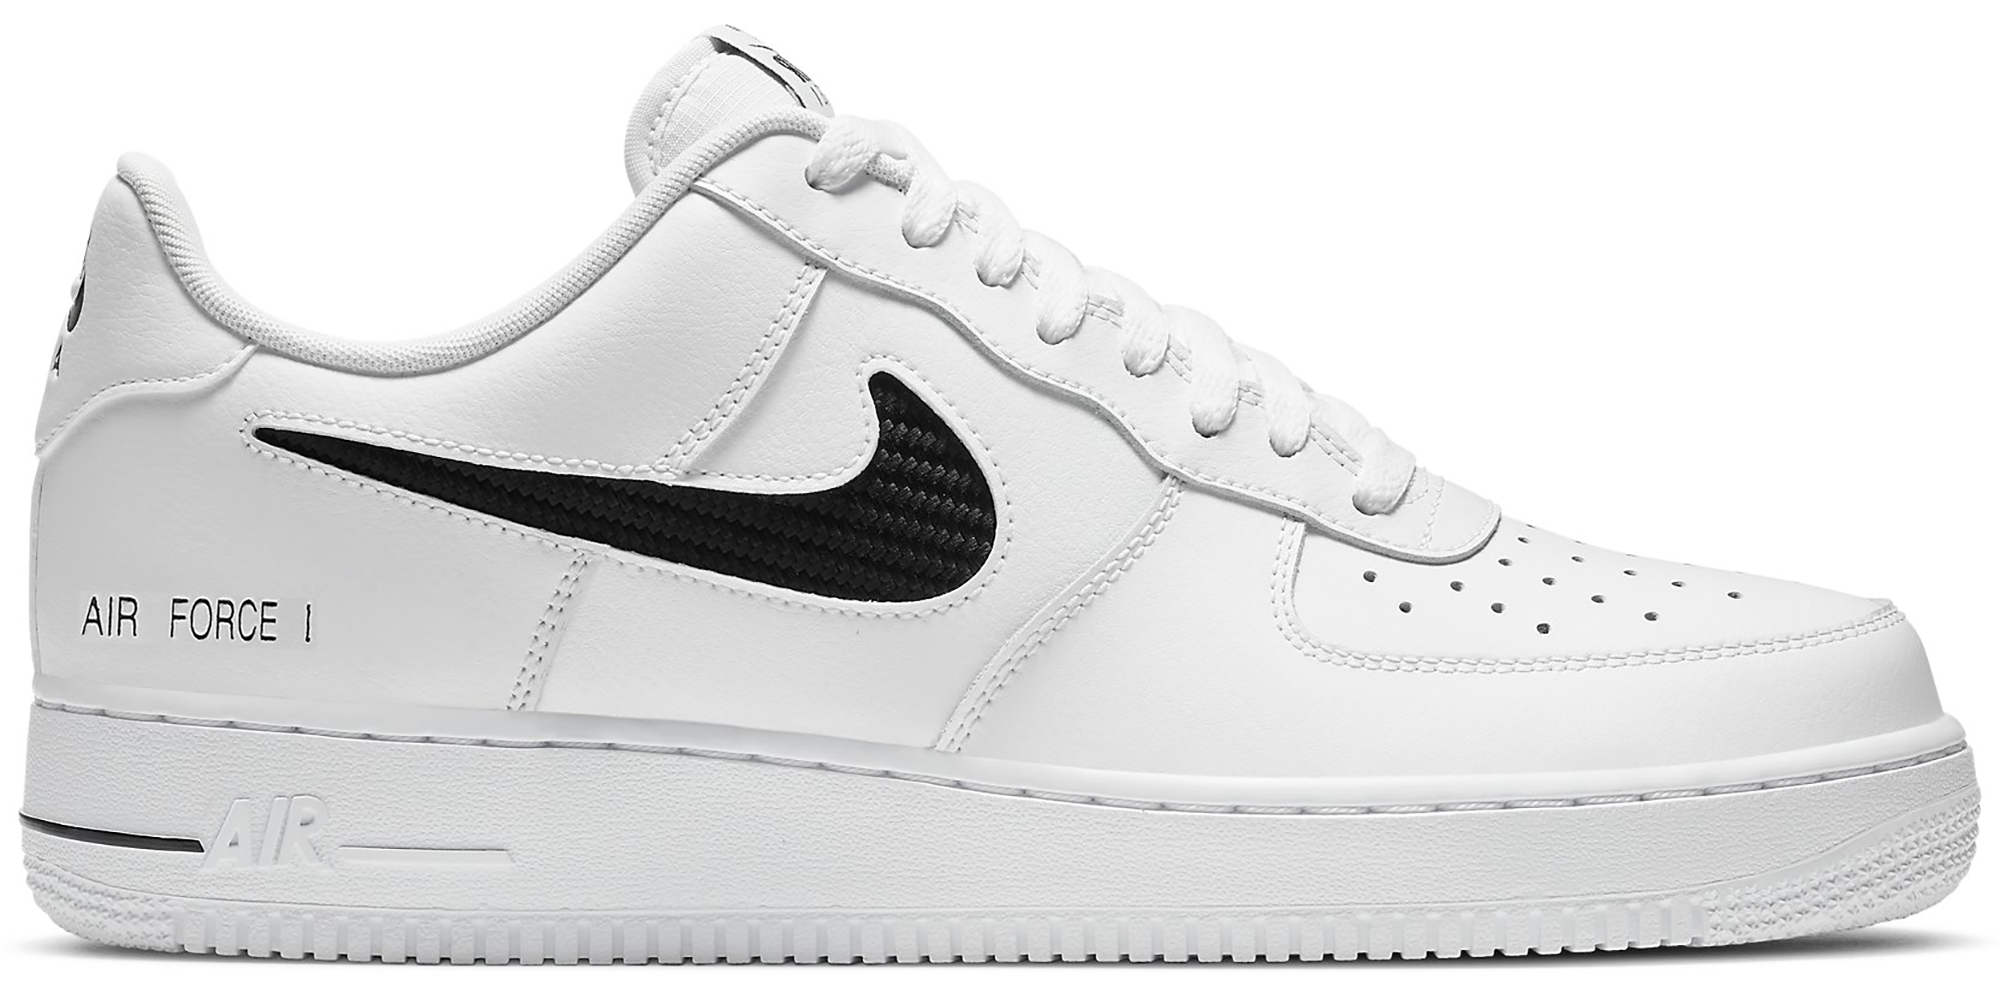 Nike Air Force 1 Low Cut Out Swoosh White Black - CZ7377-100